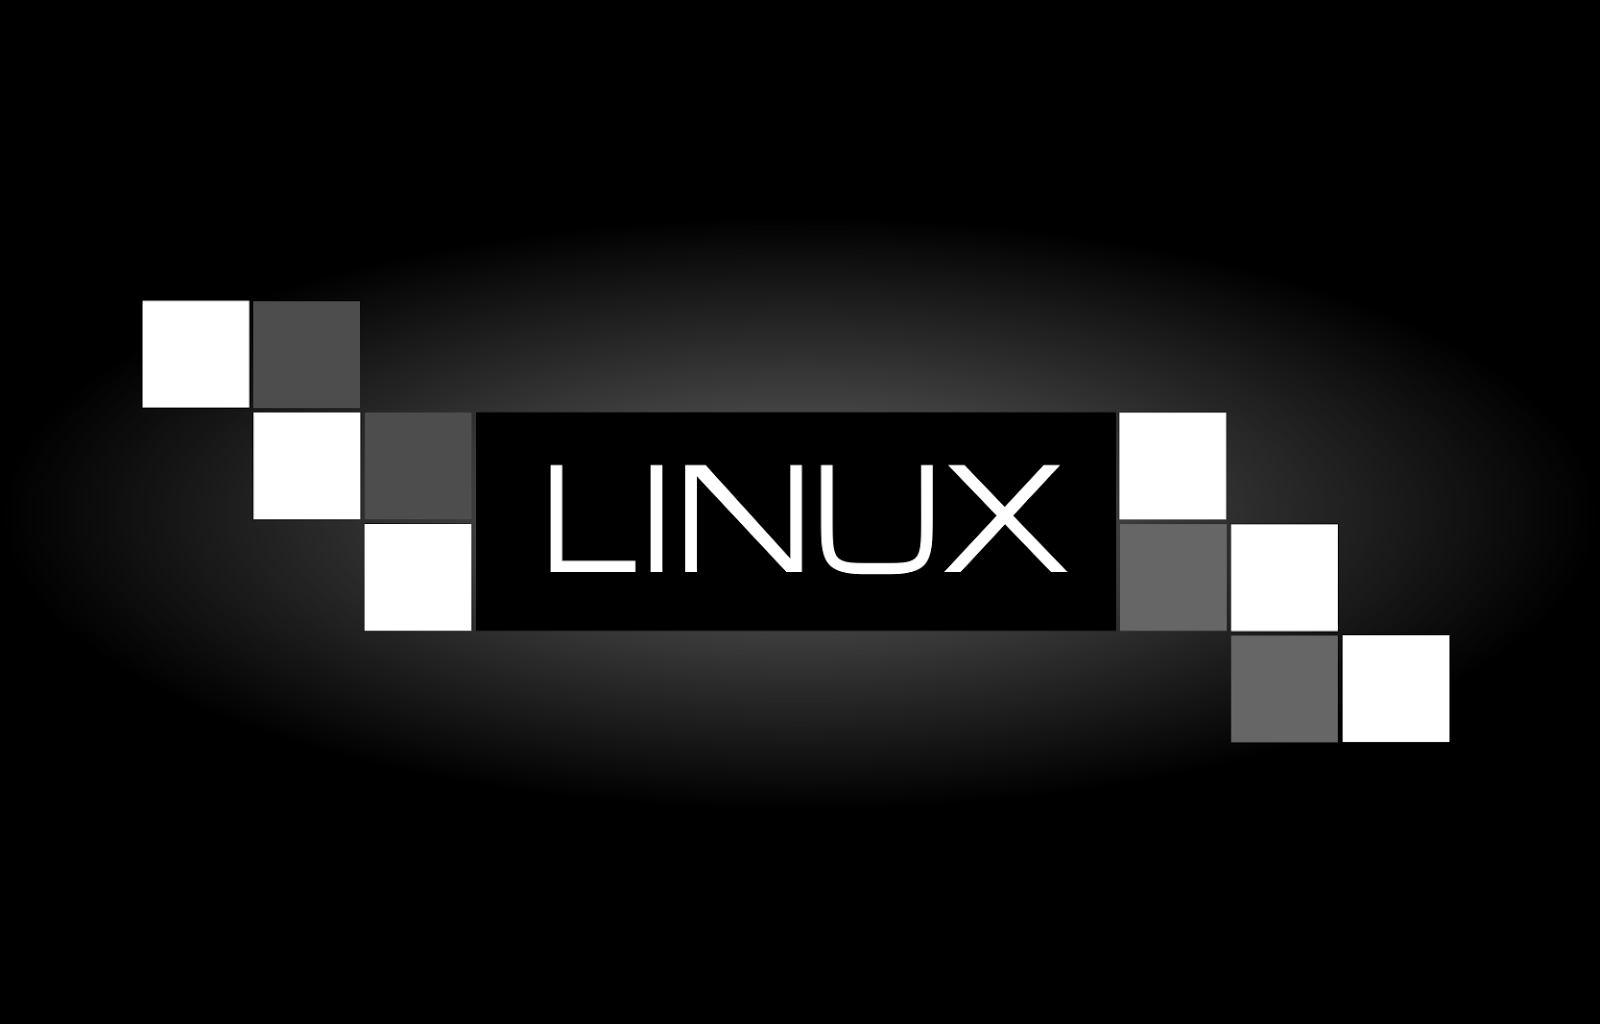 Learn Linux and Free Open Source Software (FOSS): Download Black Elegant Linux Wallpaper